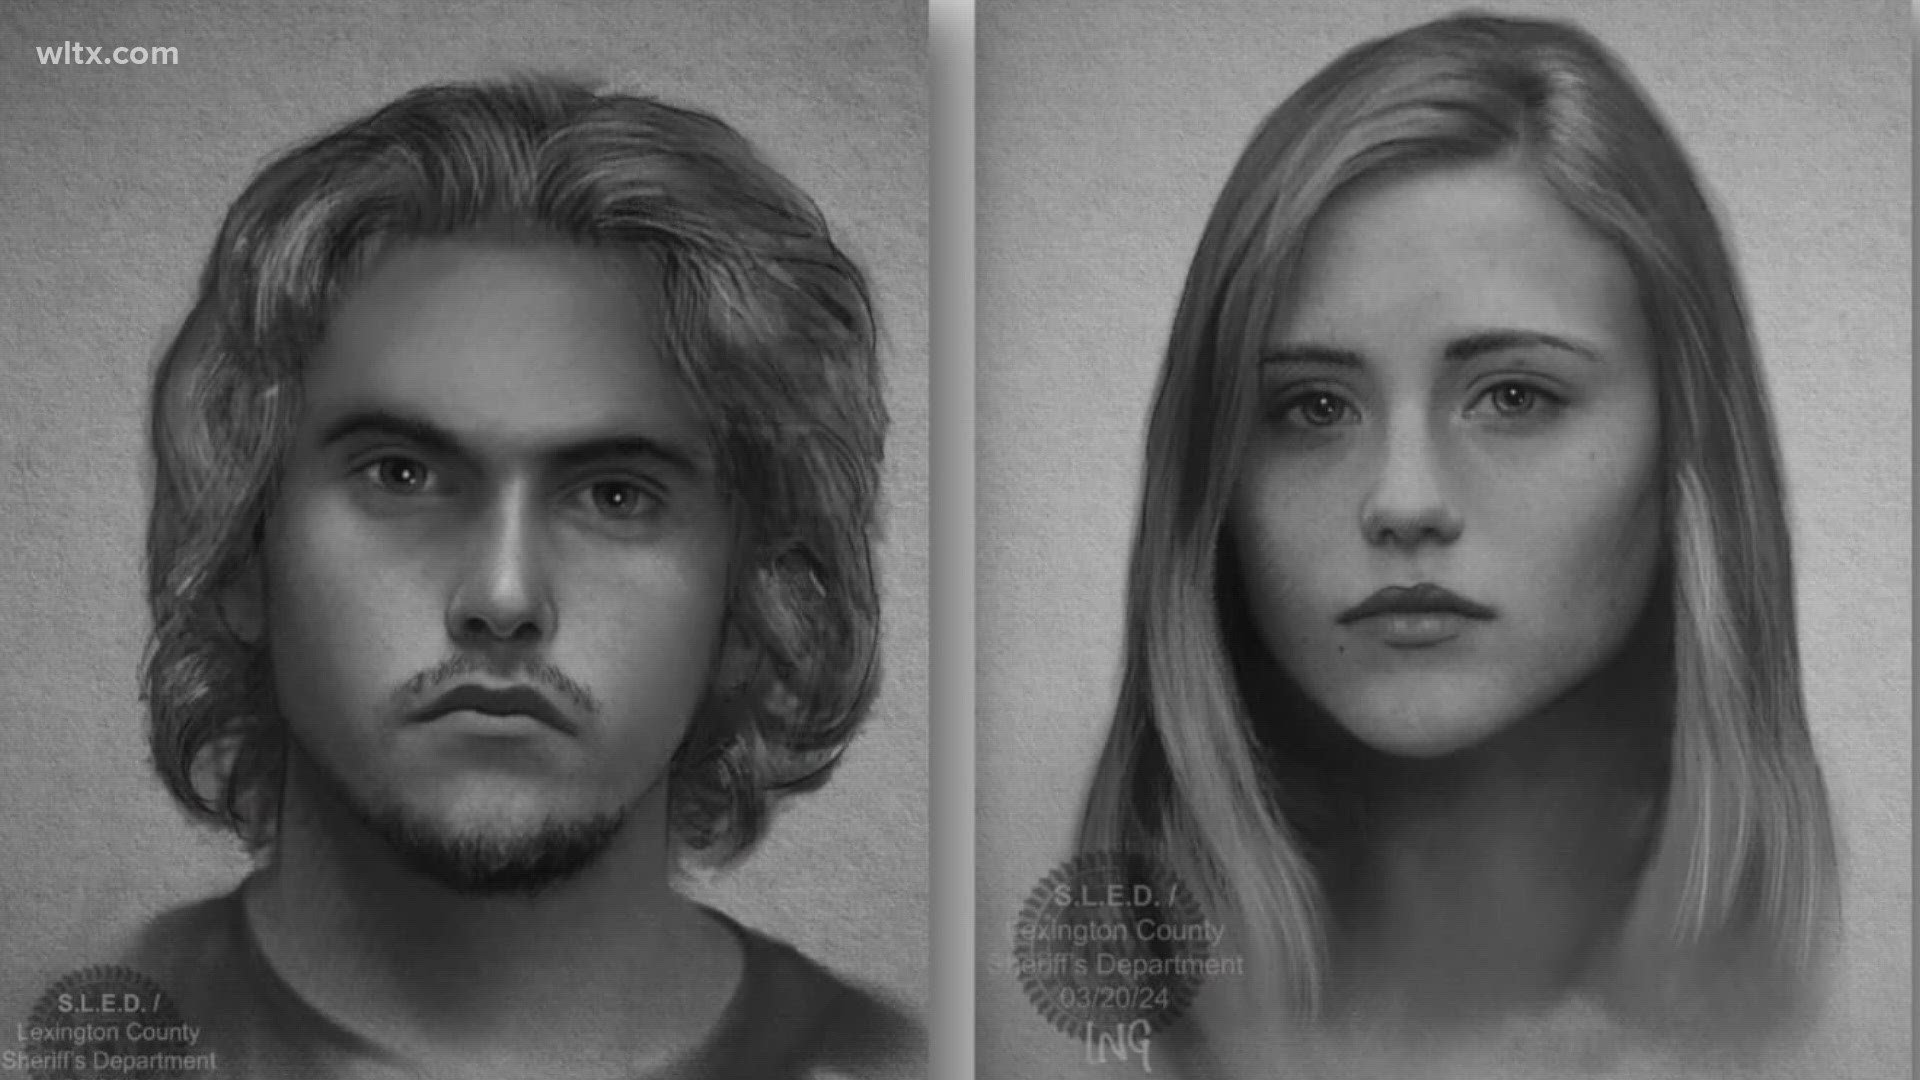 Lexington County deputies need your help finding two people they believe were involved in a road rage attack earlier this month.